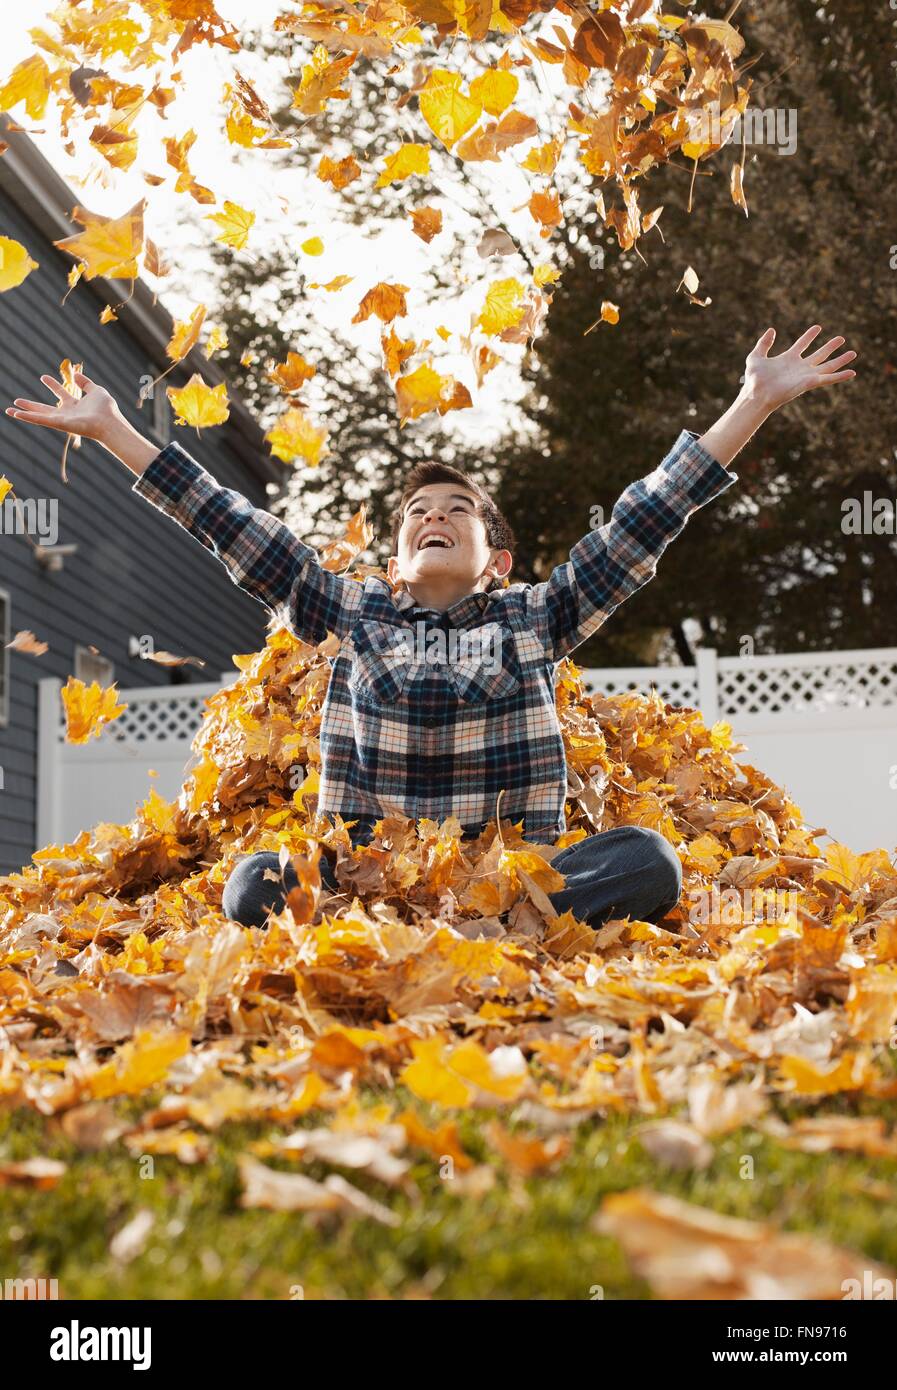 A young boy playing in a huge pile of raked autumn leaves. Stock Photo